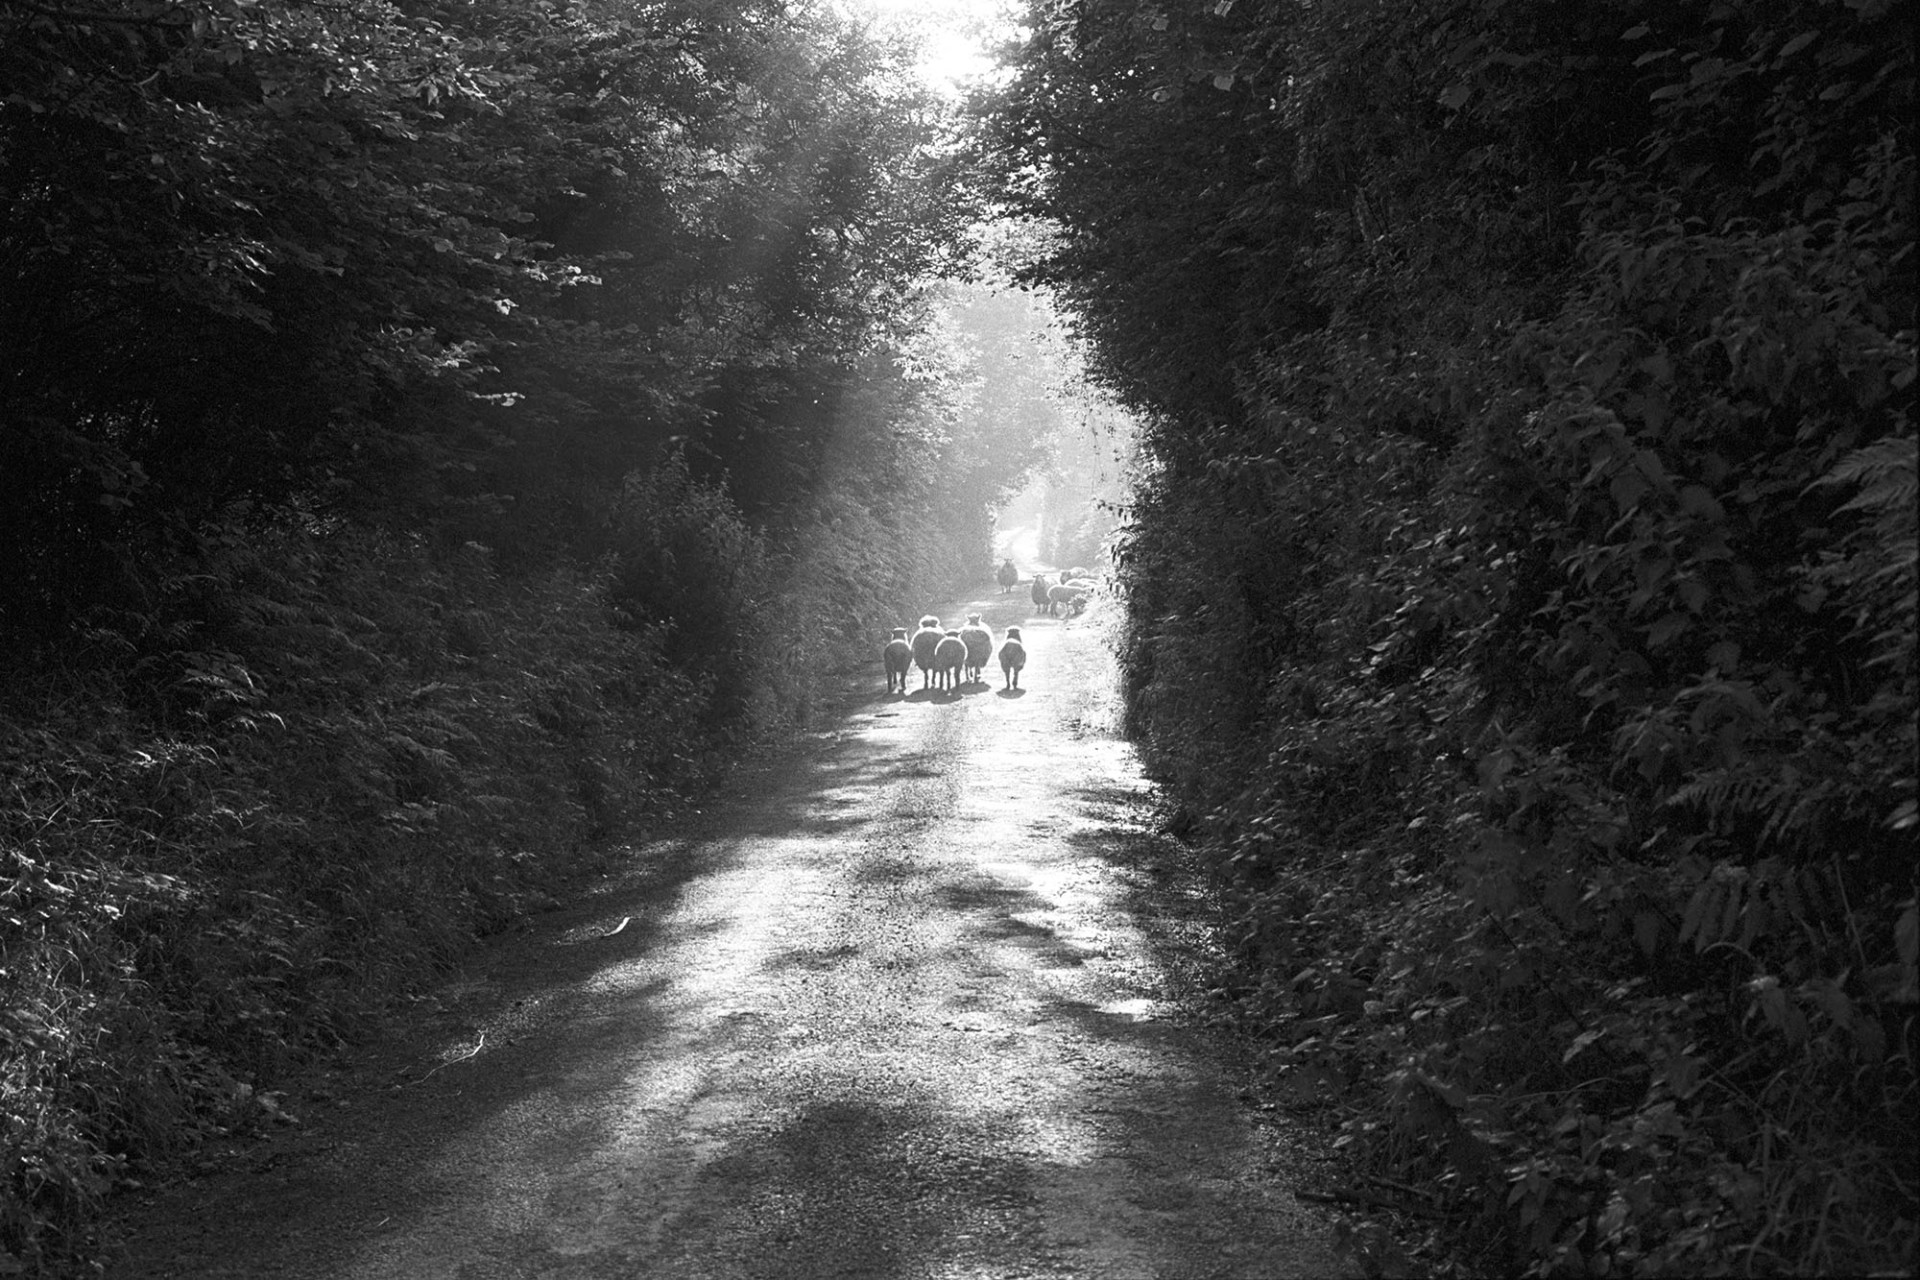 Lost sheep in sunlit lane with tall hedges, early morning belong to Archie Parkhouse. 
[Lost sheep walking along a sunny, tree lined lane at Millhams, Dolton. They belonged to Archie Parkhouse.]